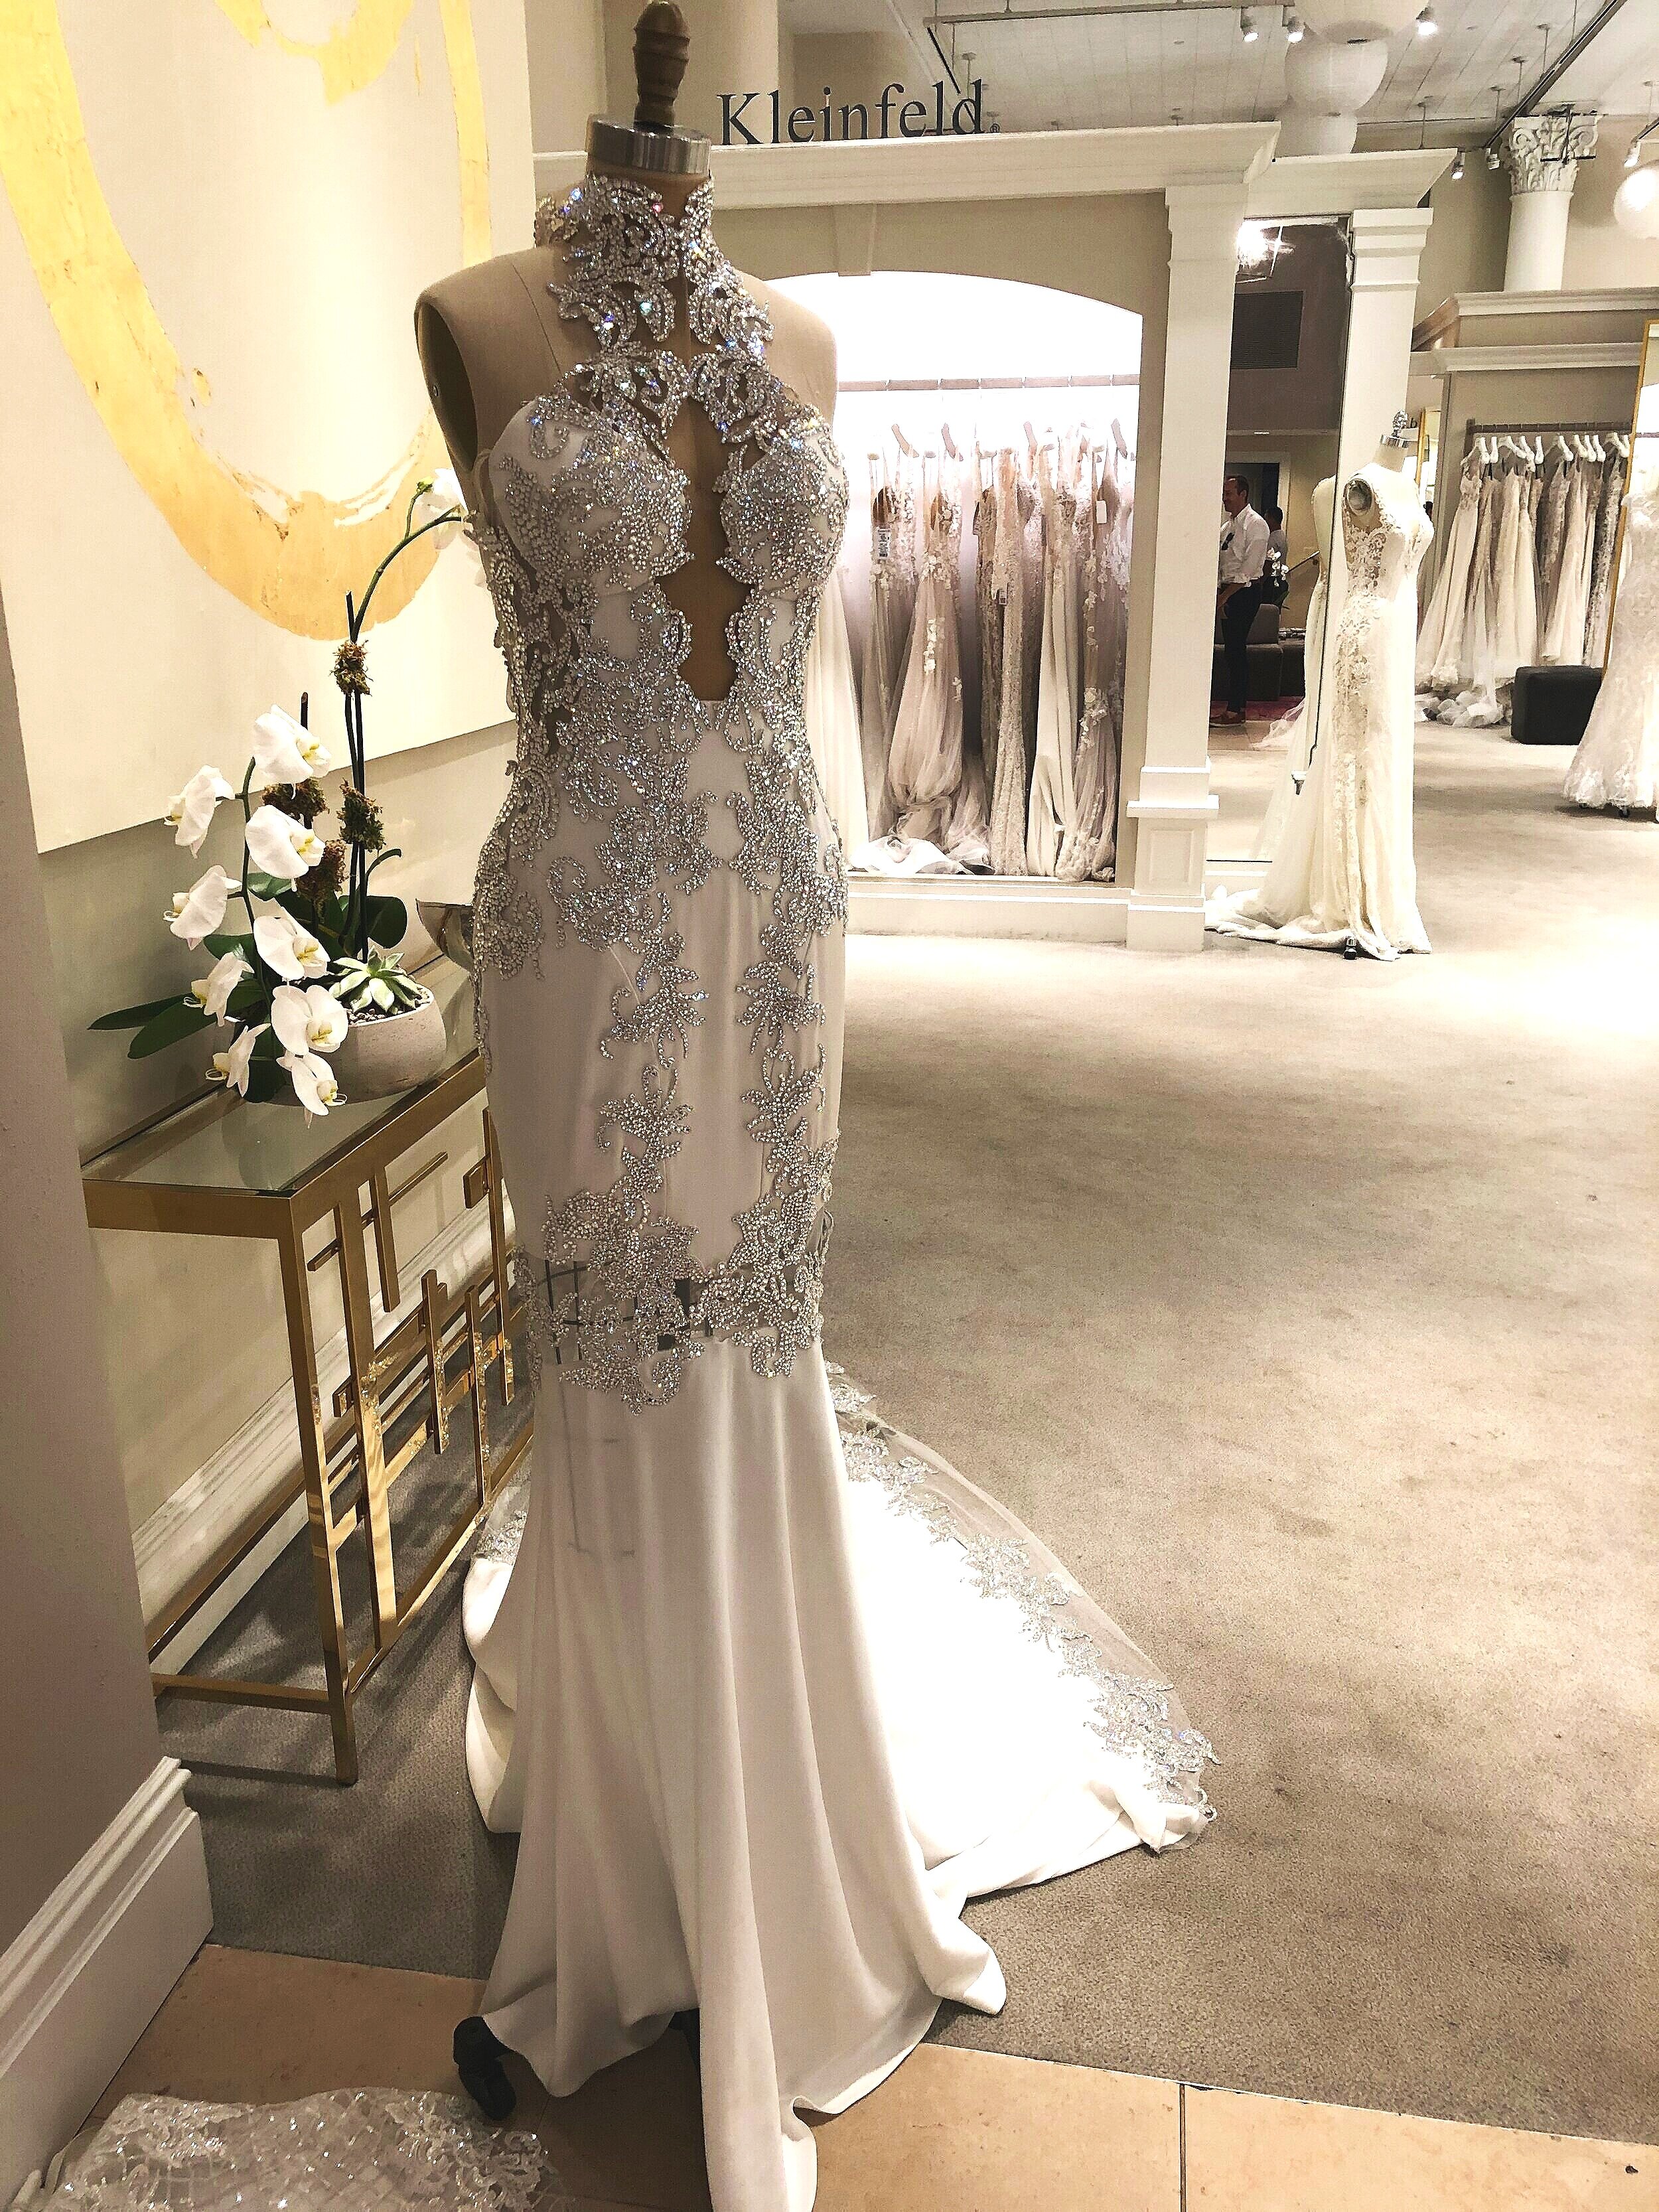 Strapless Beaded Lace Ball Gown Wedding Dress | Kleinfeld Bridal